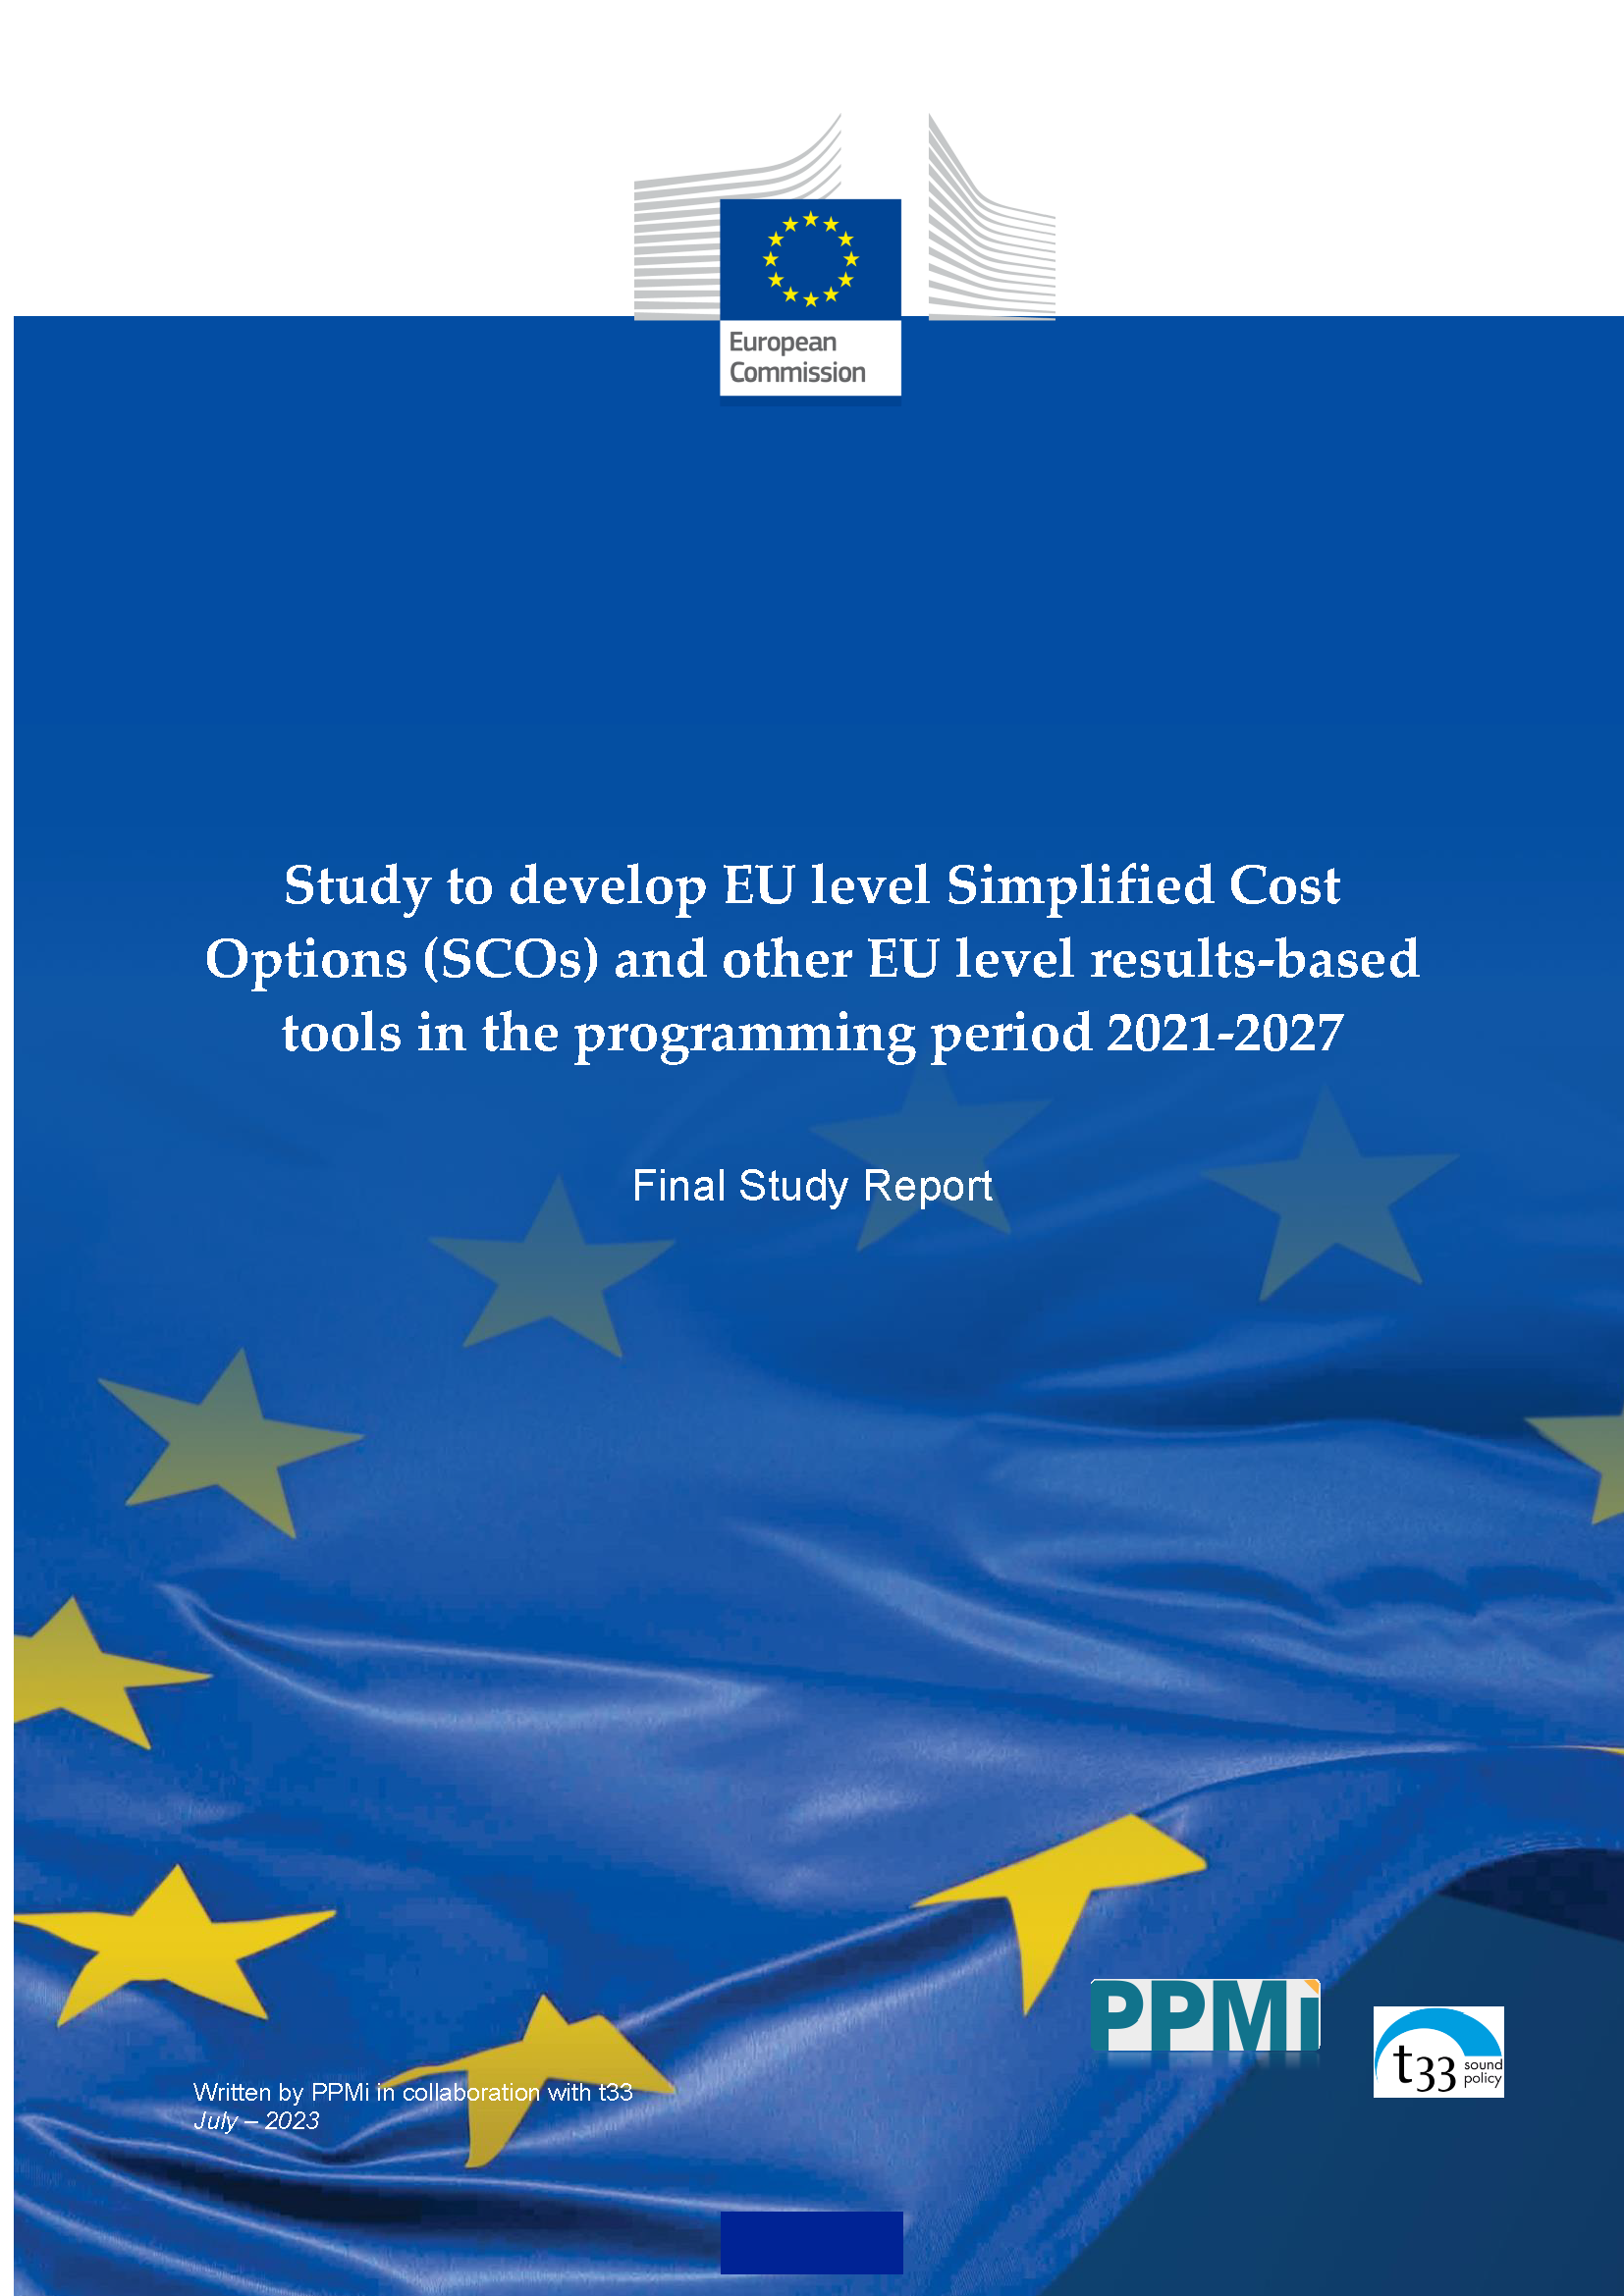 Study to develop EU level Simplified Cost Options (SCOs) and other EU level results-based tools in the programming period 2021-2027